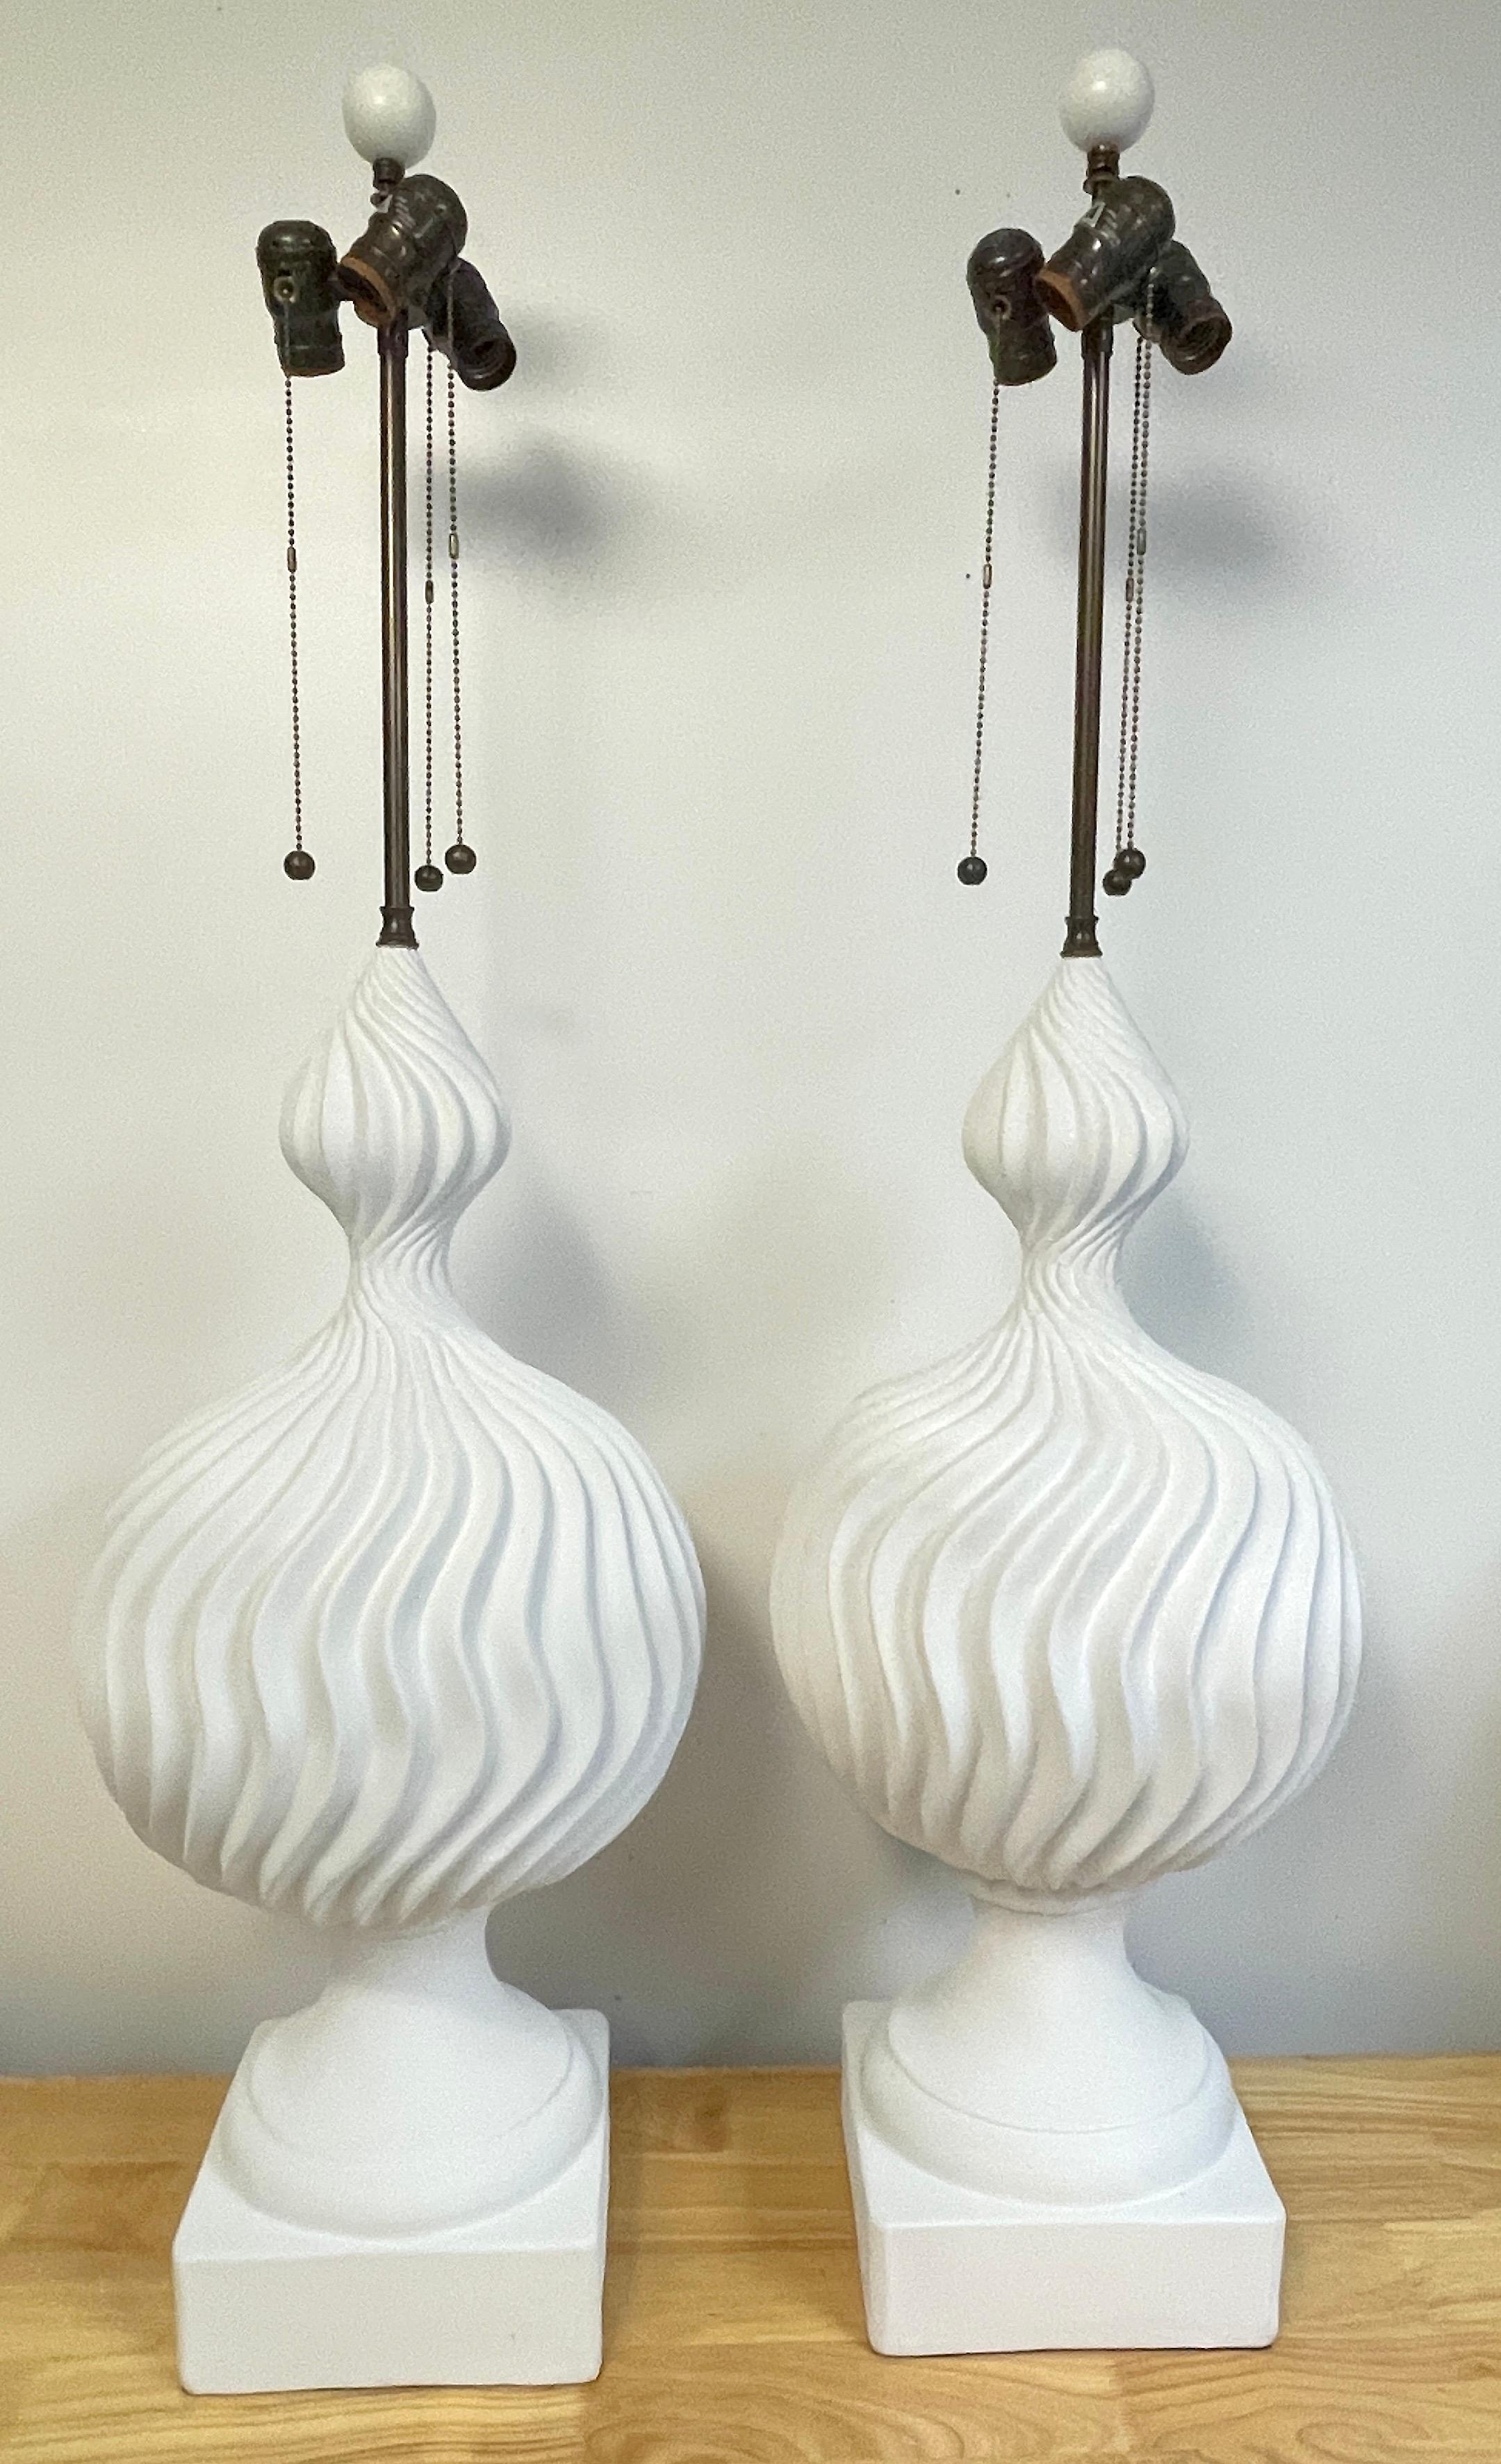 Large pair of white lacquered plaster sculptural orb lamps, by Lang Levin
Each one a substantial sculpture, Reminiscent of Michael Taylor's designs. 
Each one standing 44-inches high (28